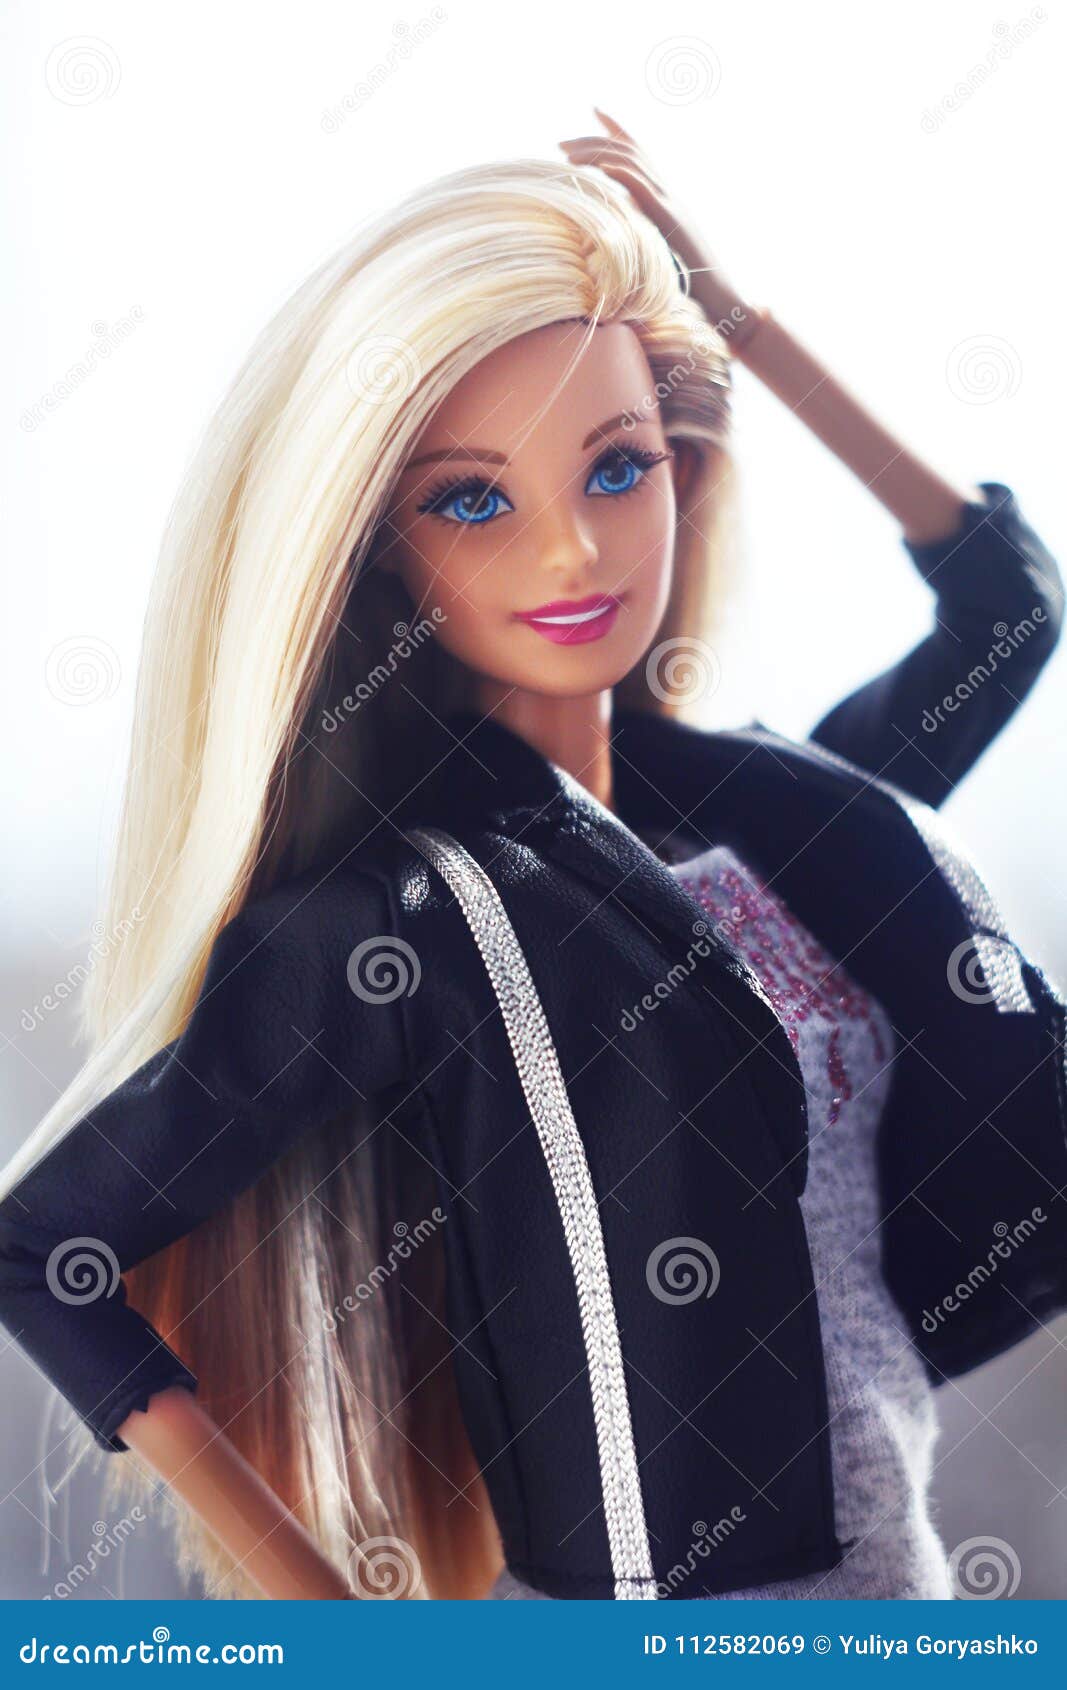 A Beautiful Barbie with White and Brown Hair. Stylish Blondy Doll ...